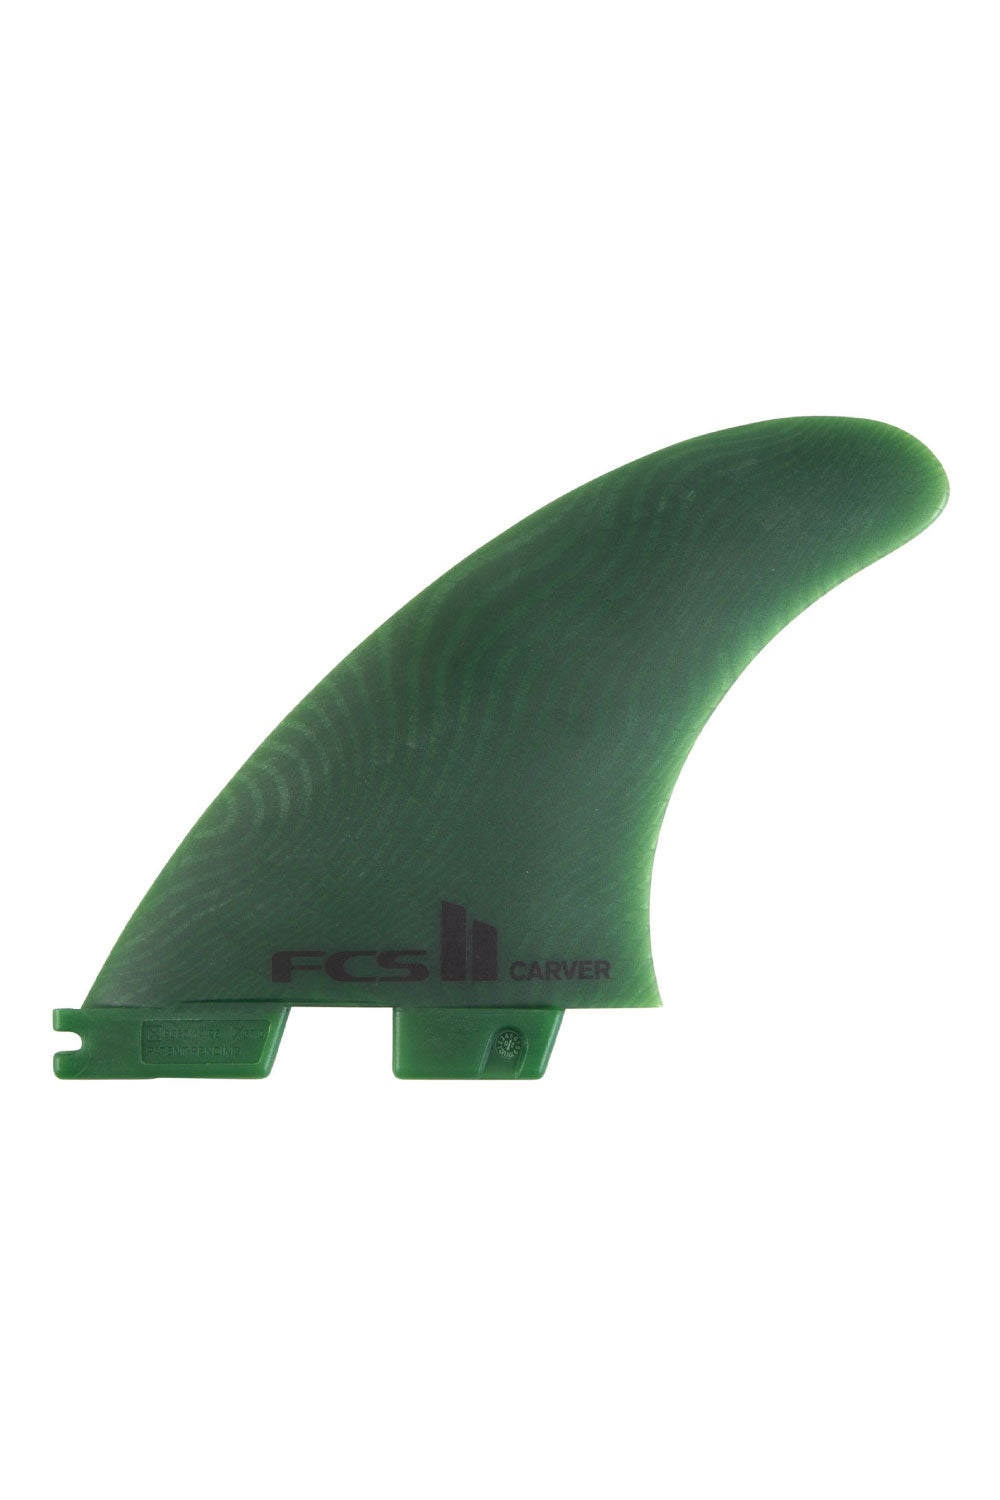 FCS2 Carver Neo Glass ECO Thruster Fin Set